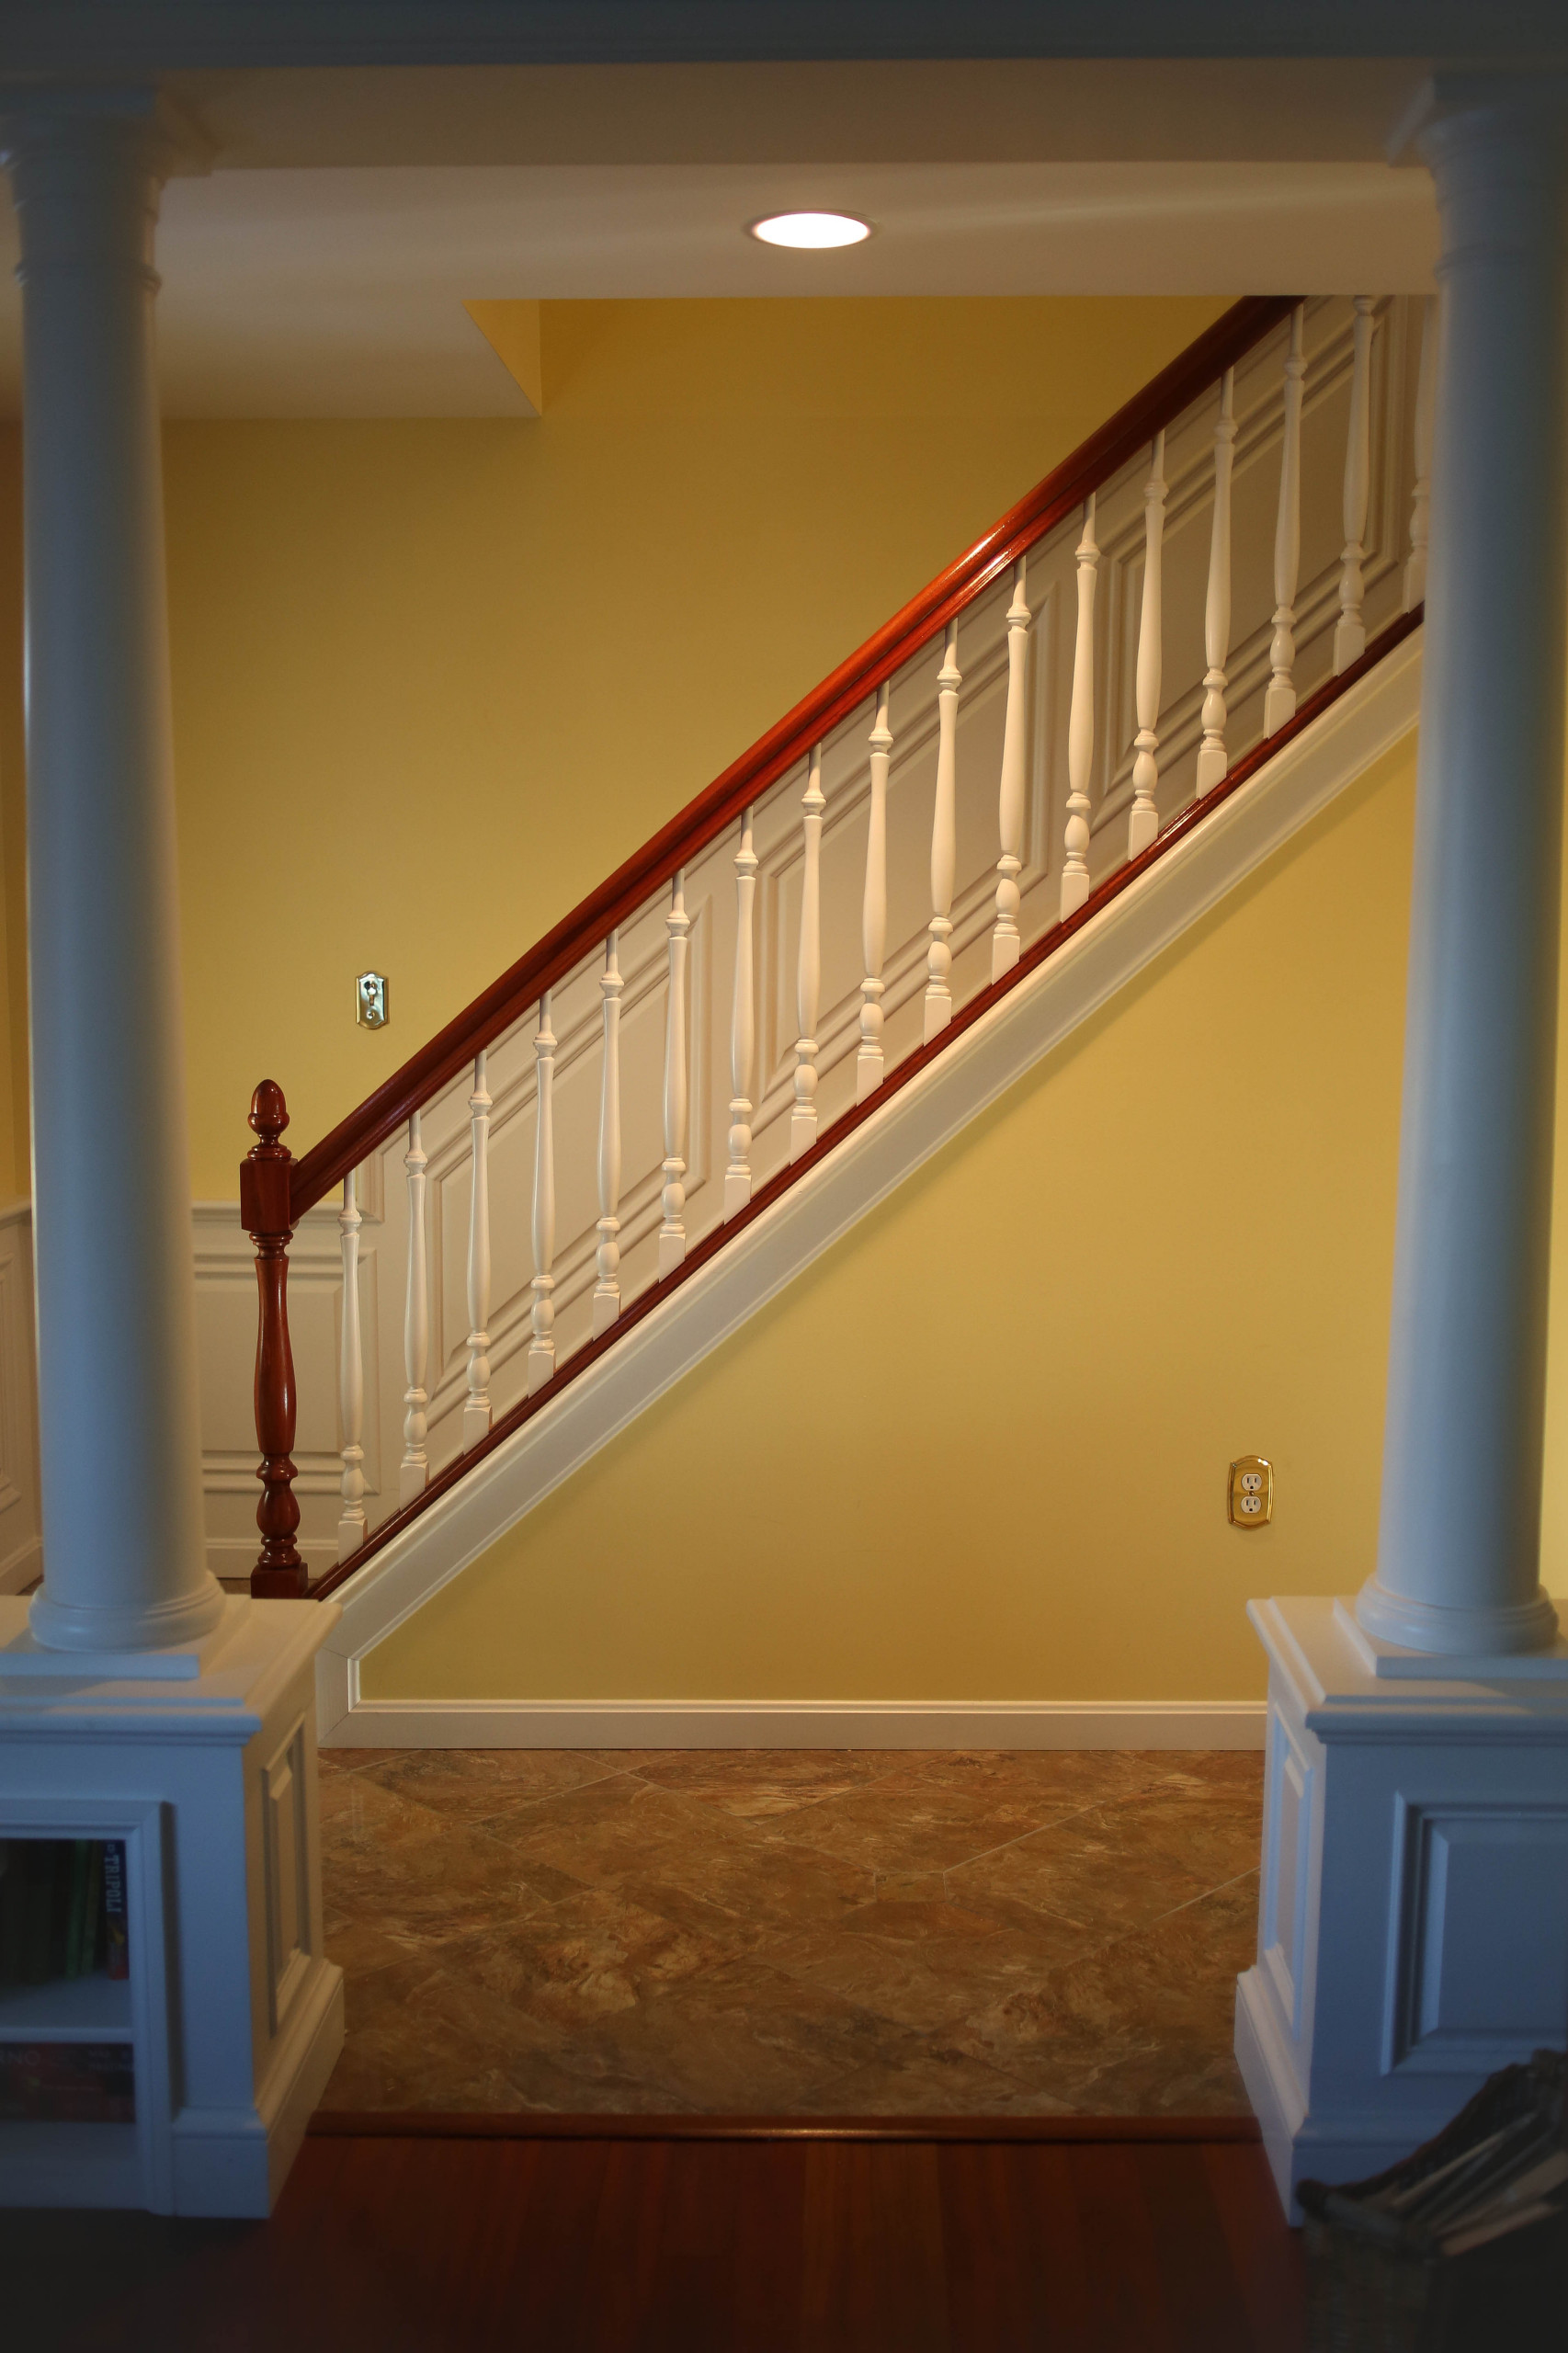 Stair Railing Project